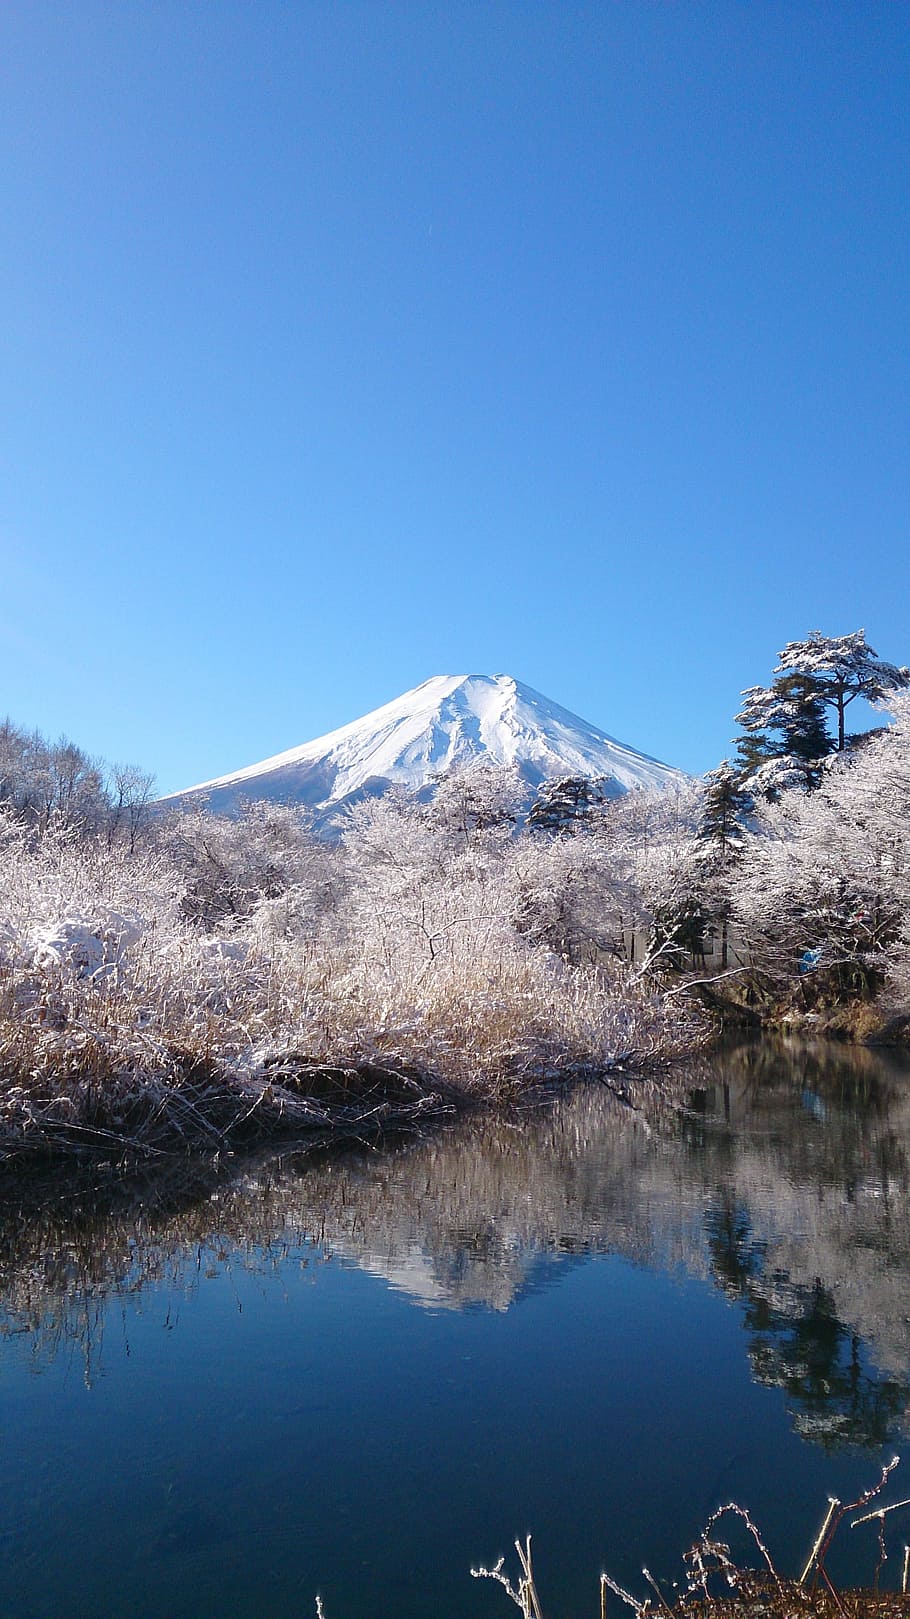 mt fuji, blue sky, mountain, world heritage site, clear skies, winter, sky, no cloud, pond, beauty in nature